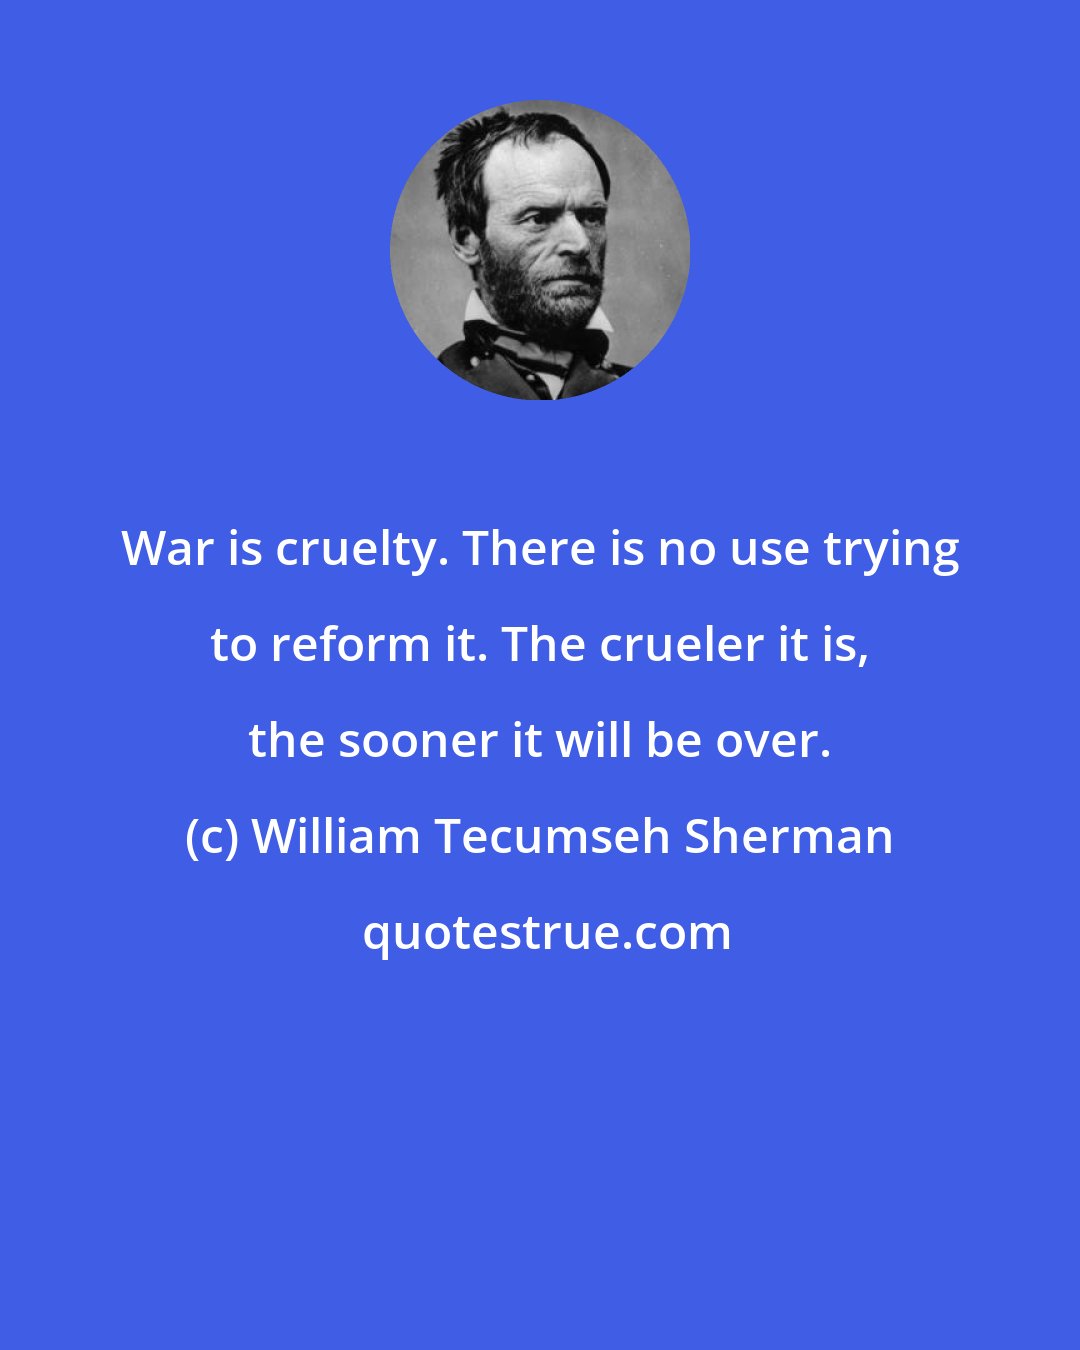 William Tecumseh Sherman: War is cruelty. There is no use trying to reform it. The crueler it is, the sooner it will be over.